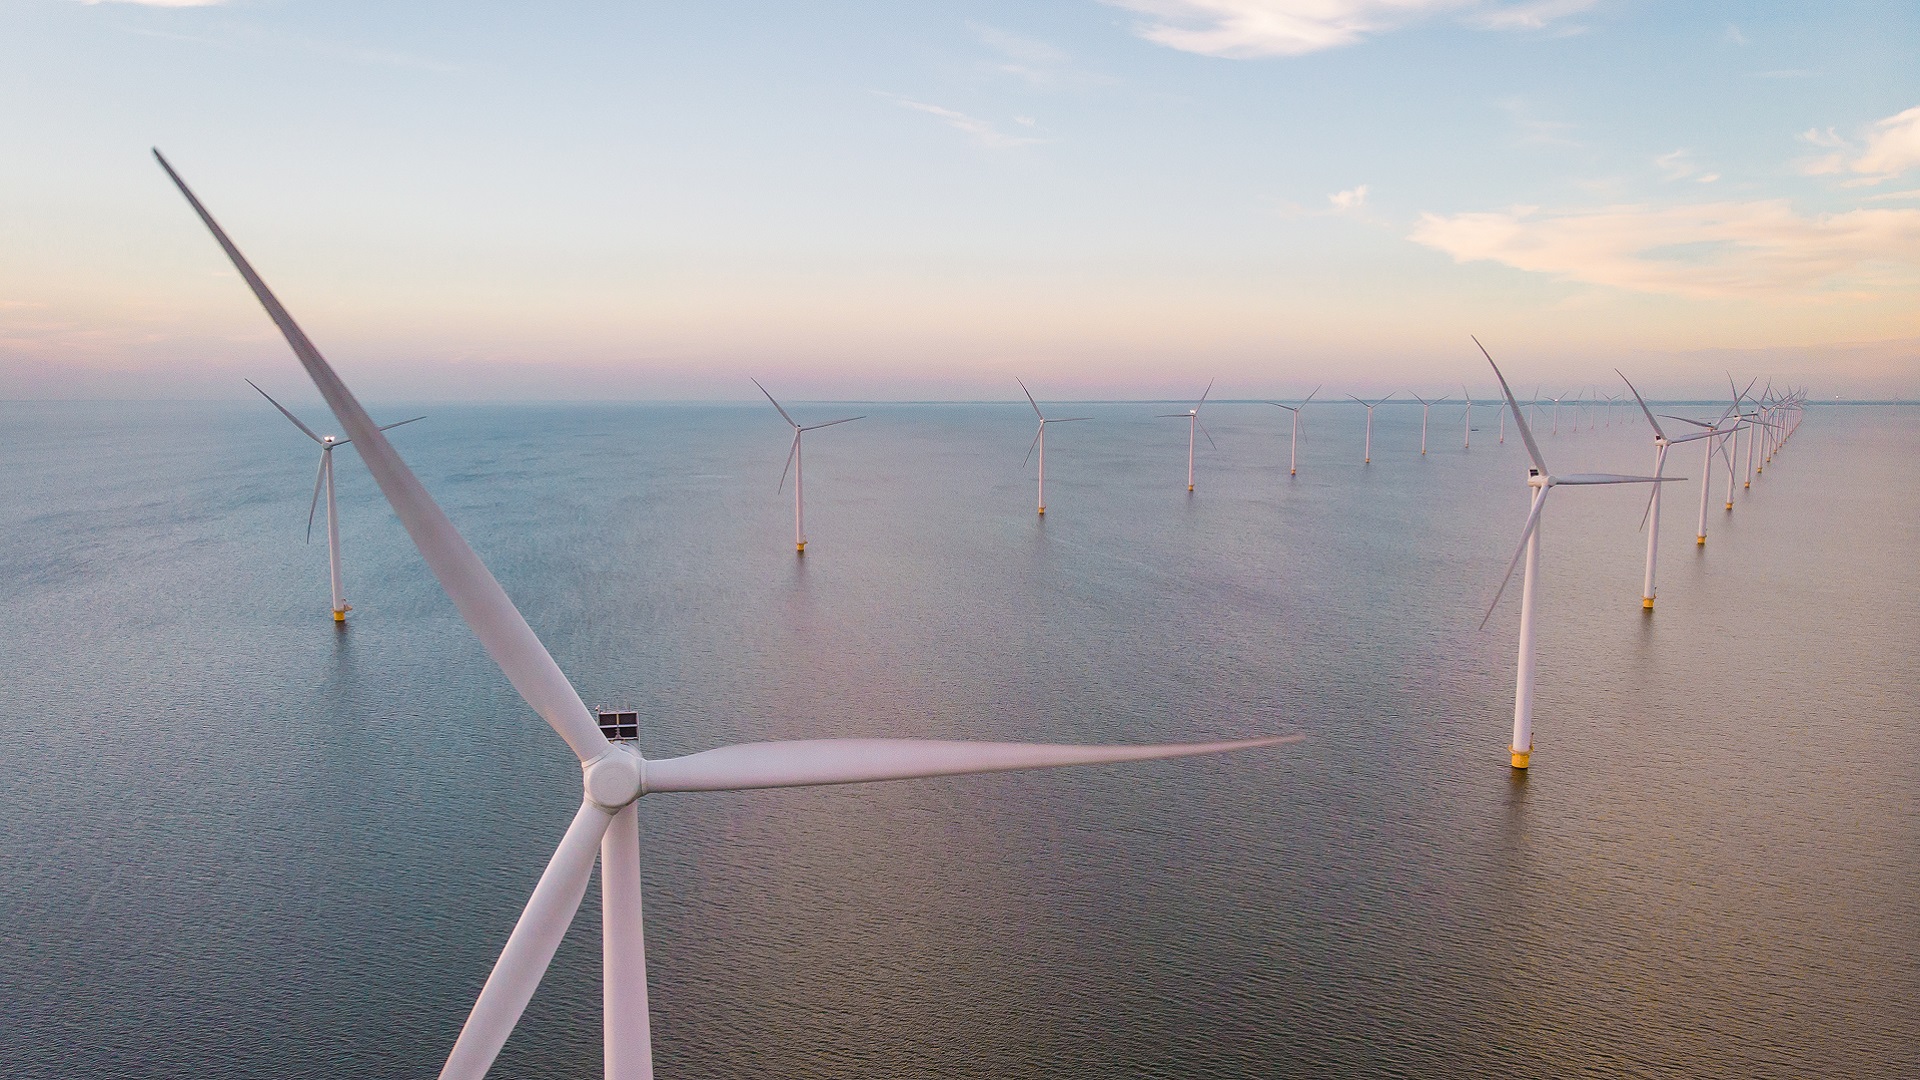 Offshore wind in Australia: The key legal interfaces